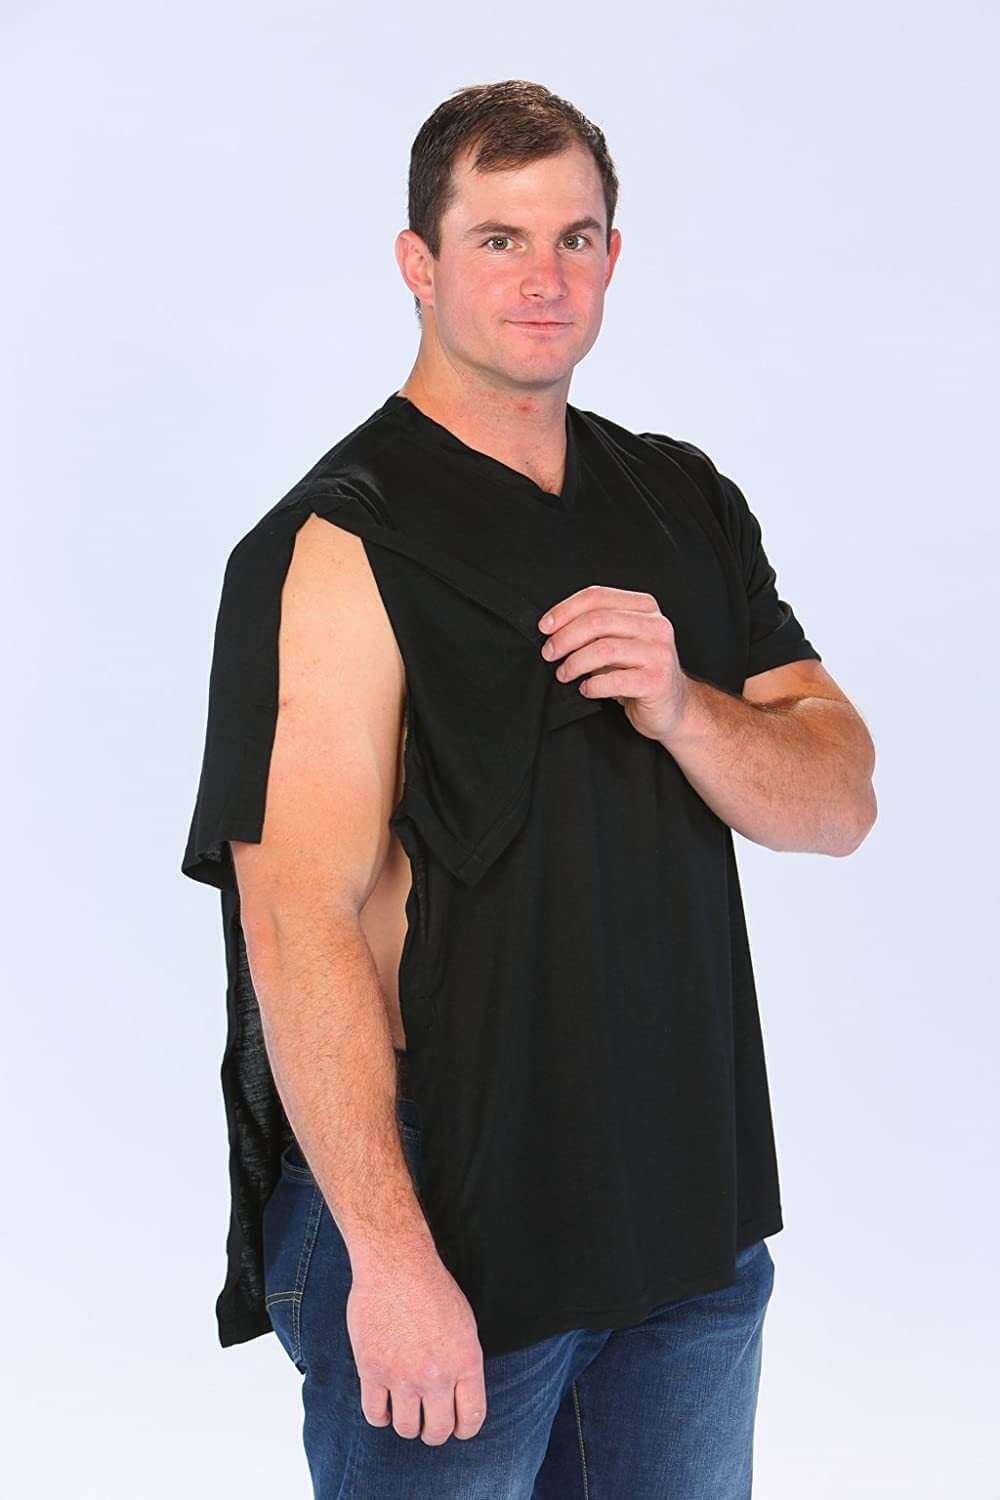 John Coban Hits It Out-Of-The-Park with his SlingShirt® Invention 1